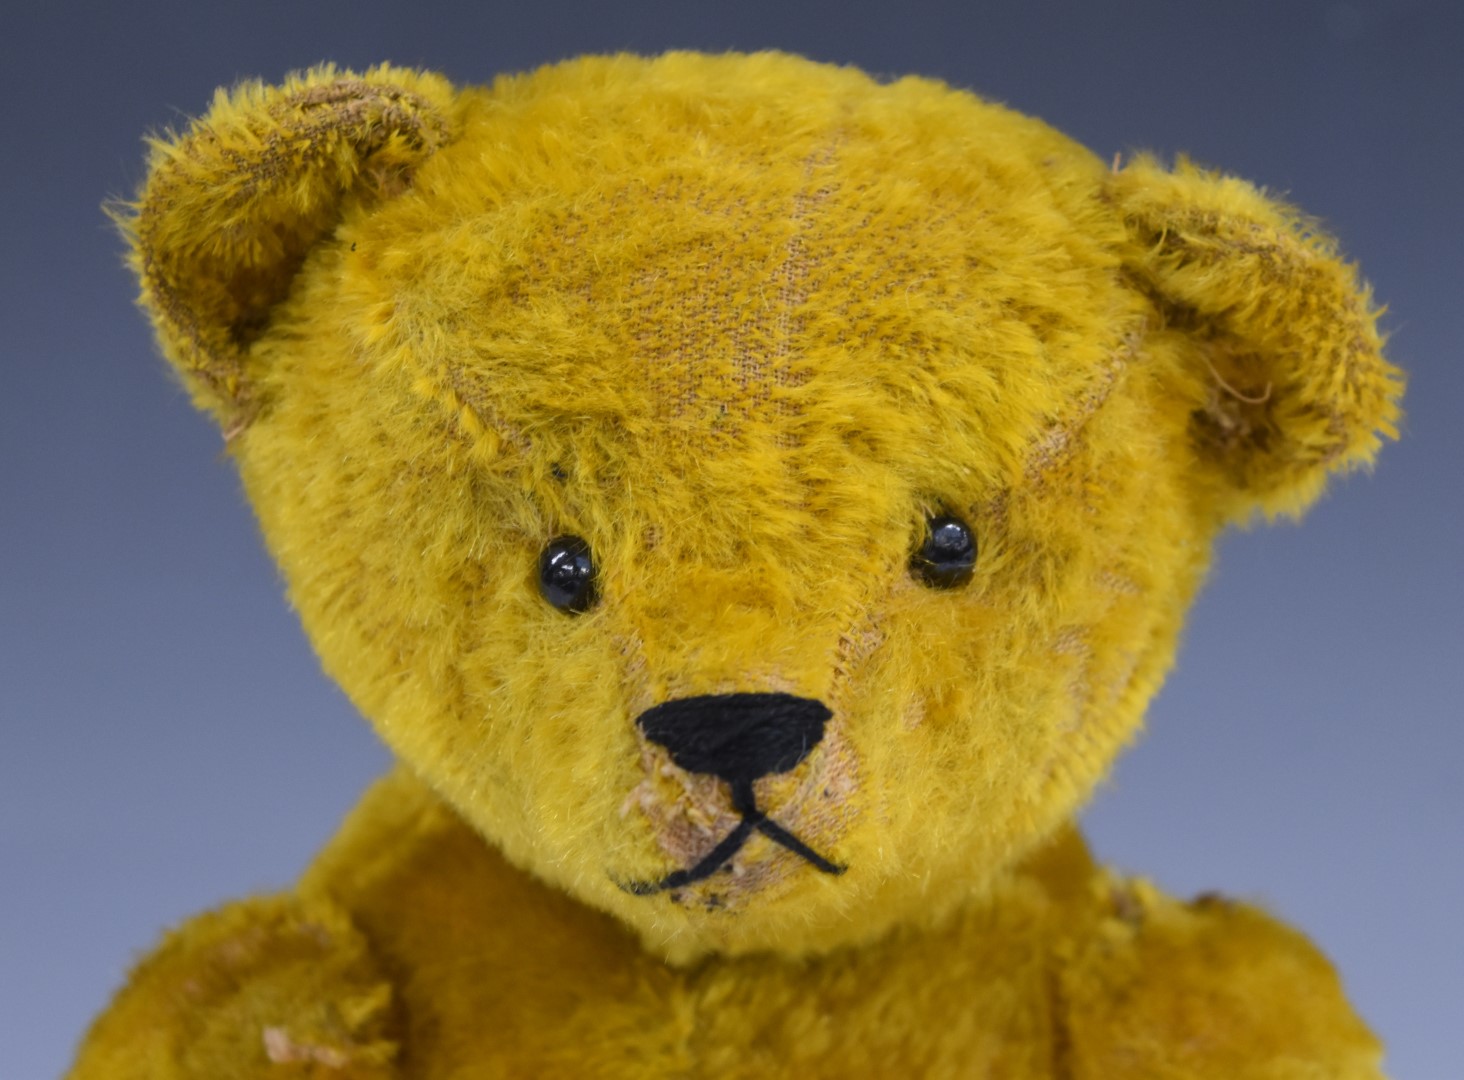 American Teddy bear with golden mohair, straw filling, disc joints, felt pads and stitched features, - Image 3 of 3